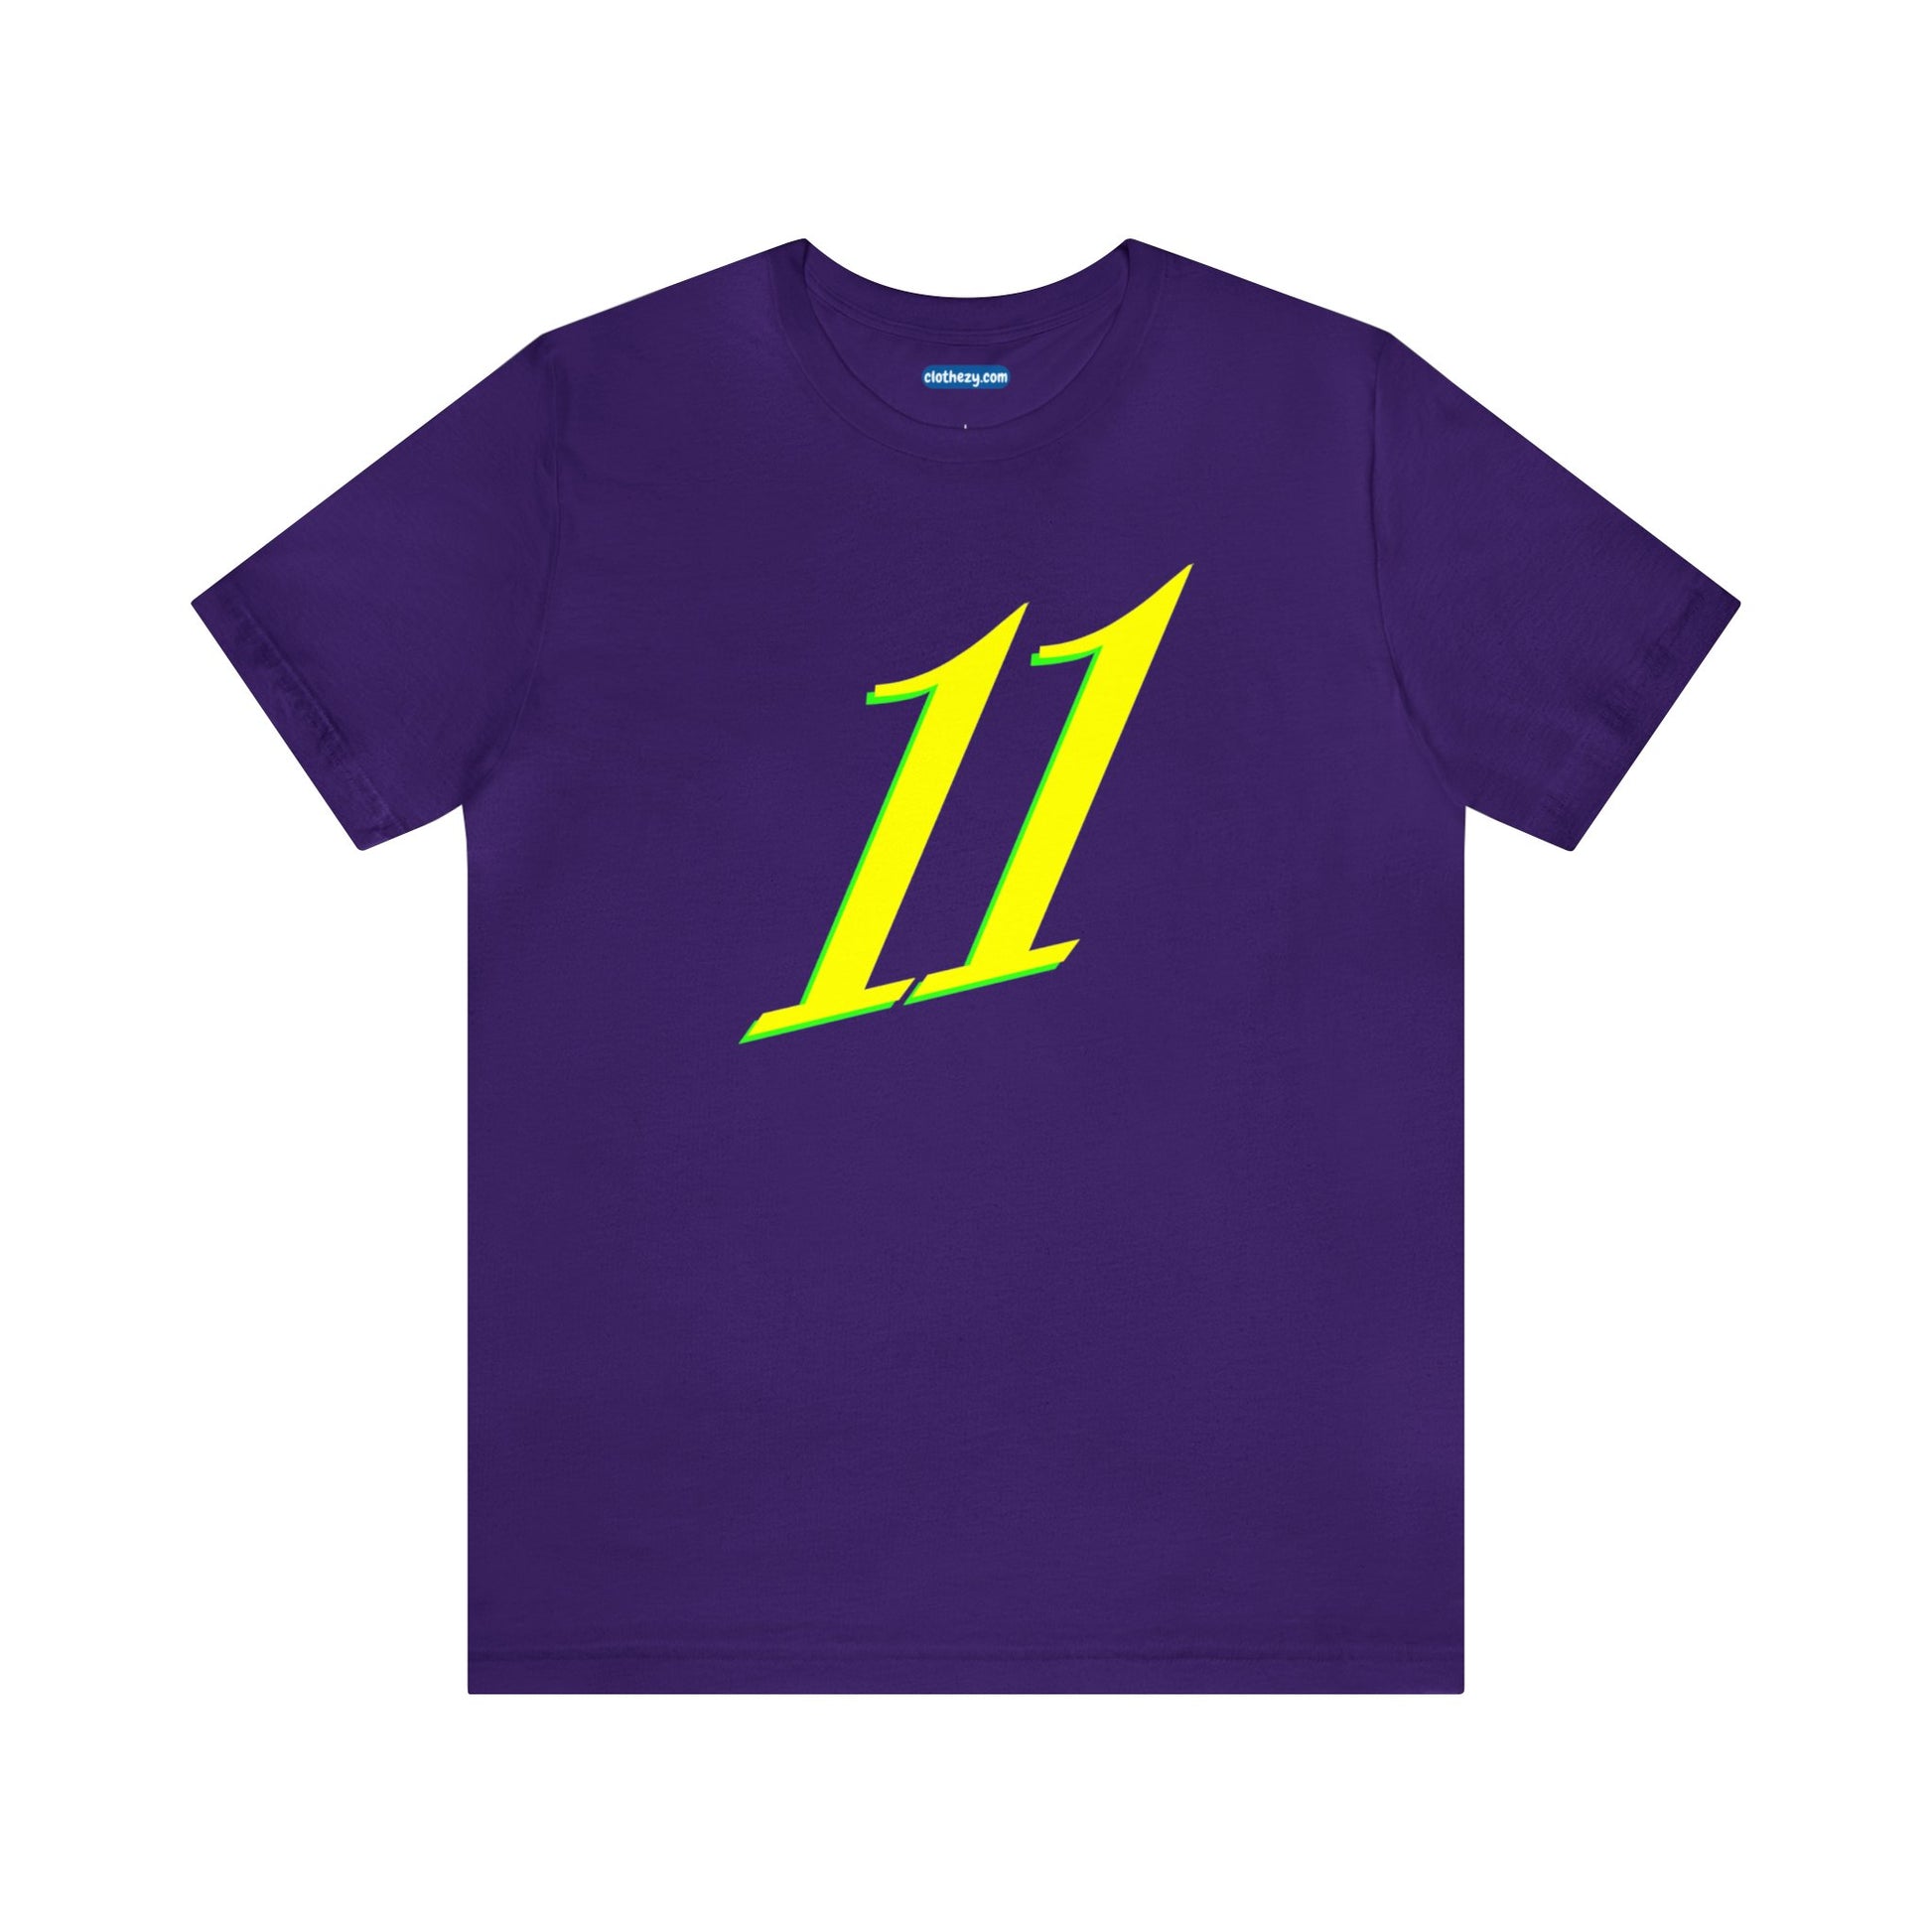 Number 11 Design - Soft Cotton Tee for birthdays and celebrations, Gift for friends and family, Multiple Options by clothezy.com in Purple Size Small - Buy Now